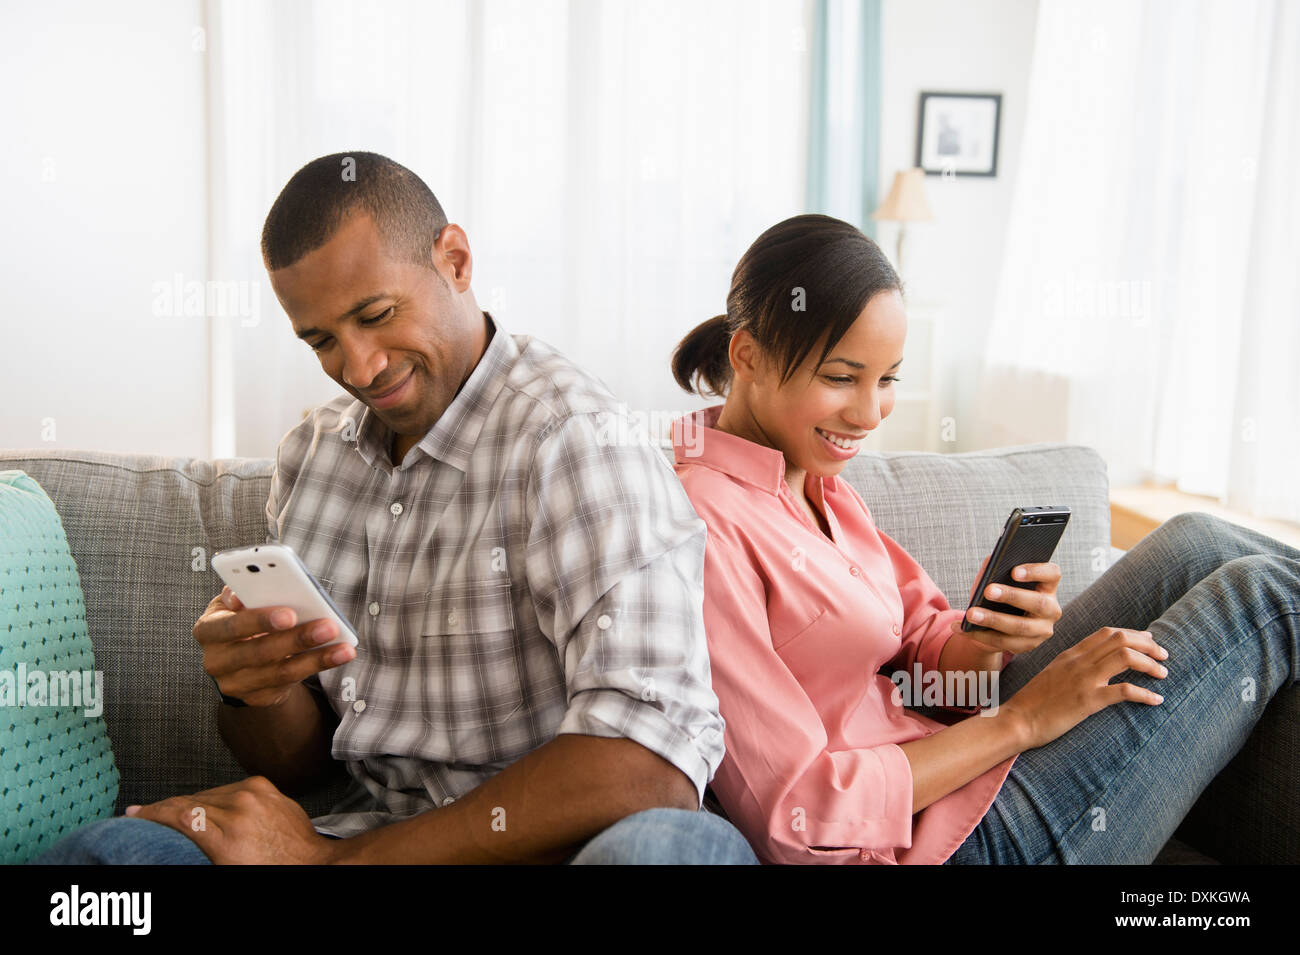 Couple using cell phones back to back on sofa Stock Photo